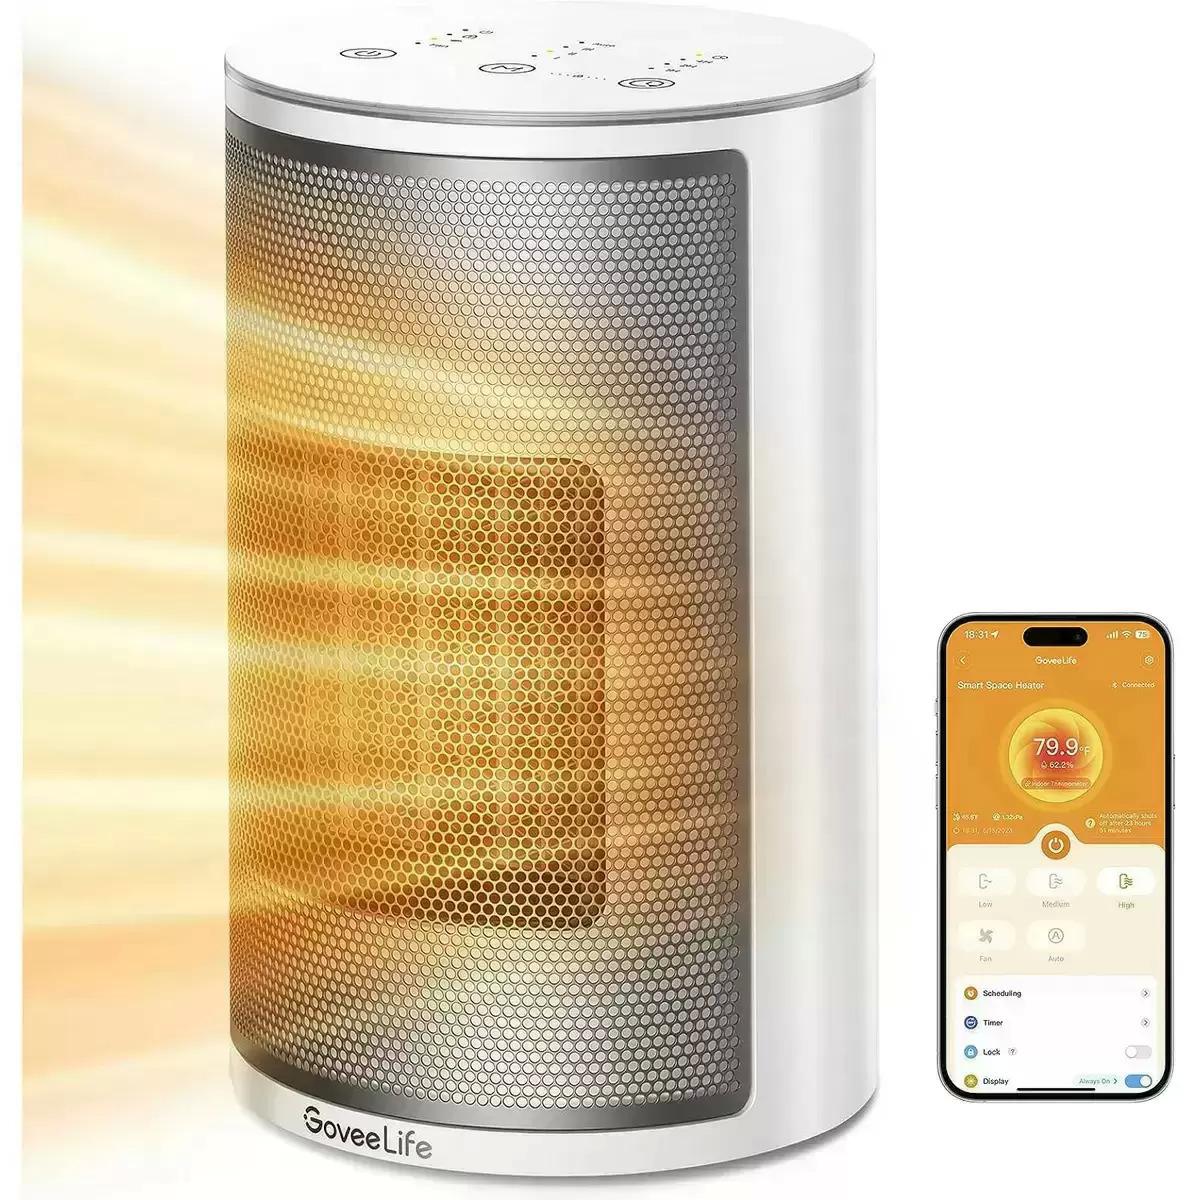 GoveeLife 1500W Smart Space Heater H7135 for $24.99 Shipped